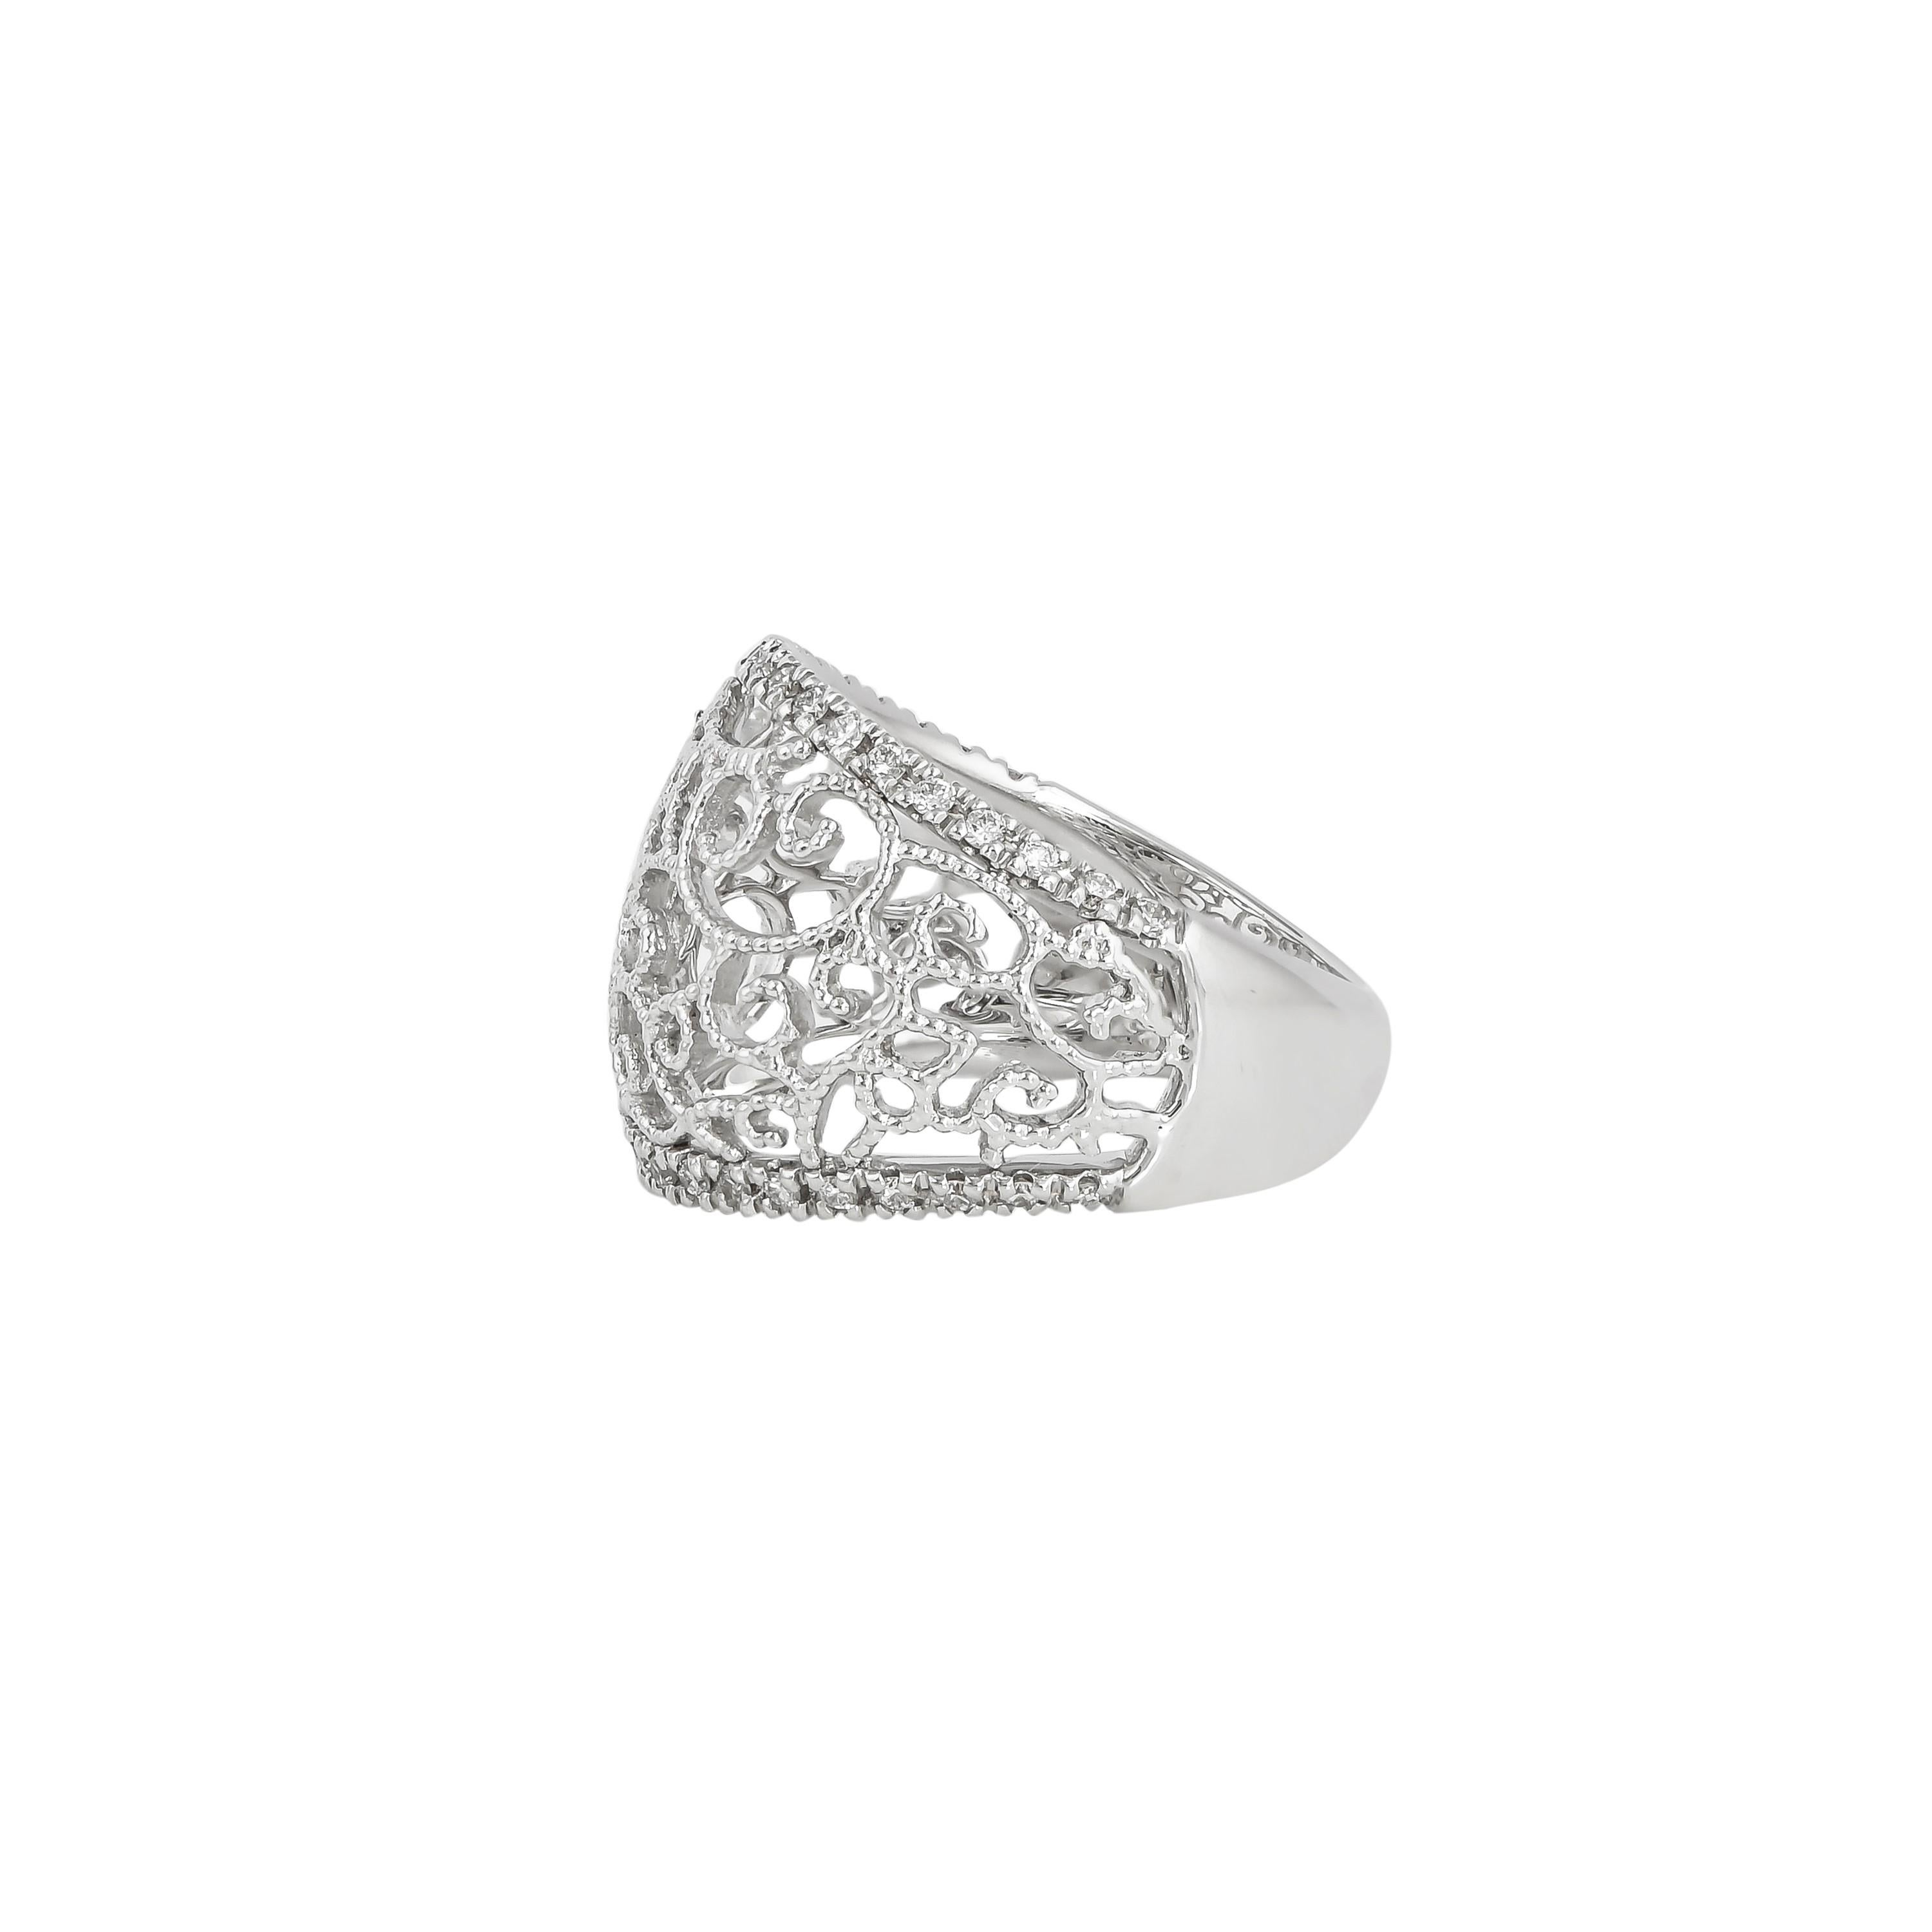 Contemporary 0.304 Carat Diamond Ring in 18 Karat White Gold For Sale